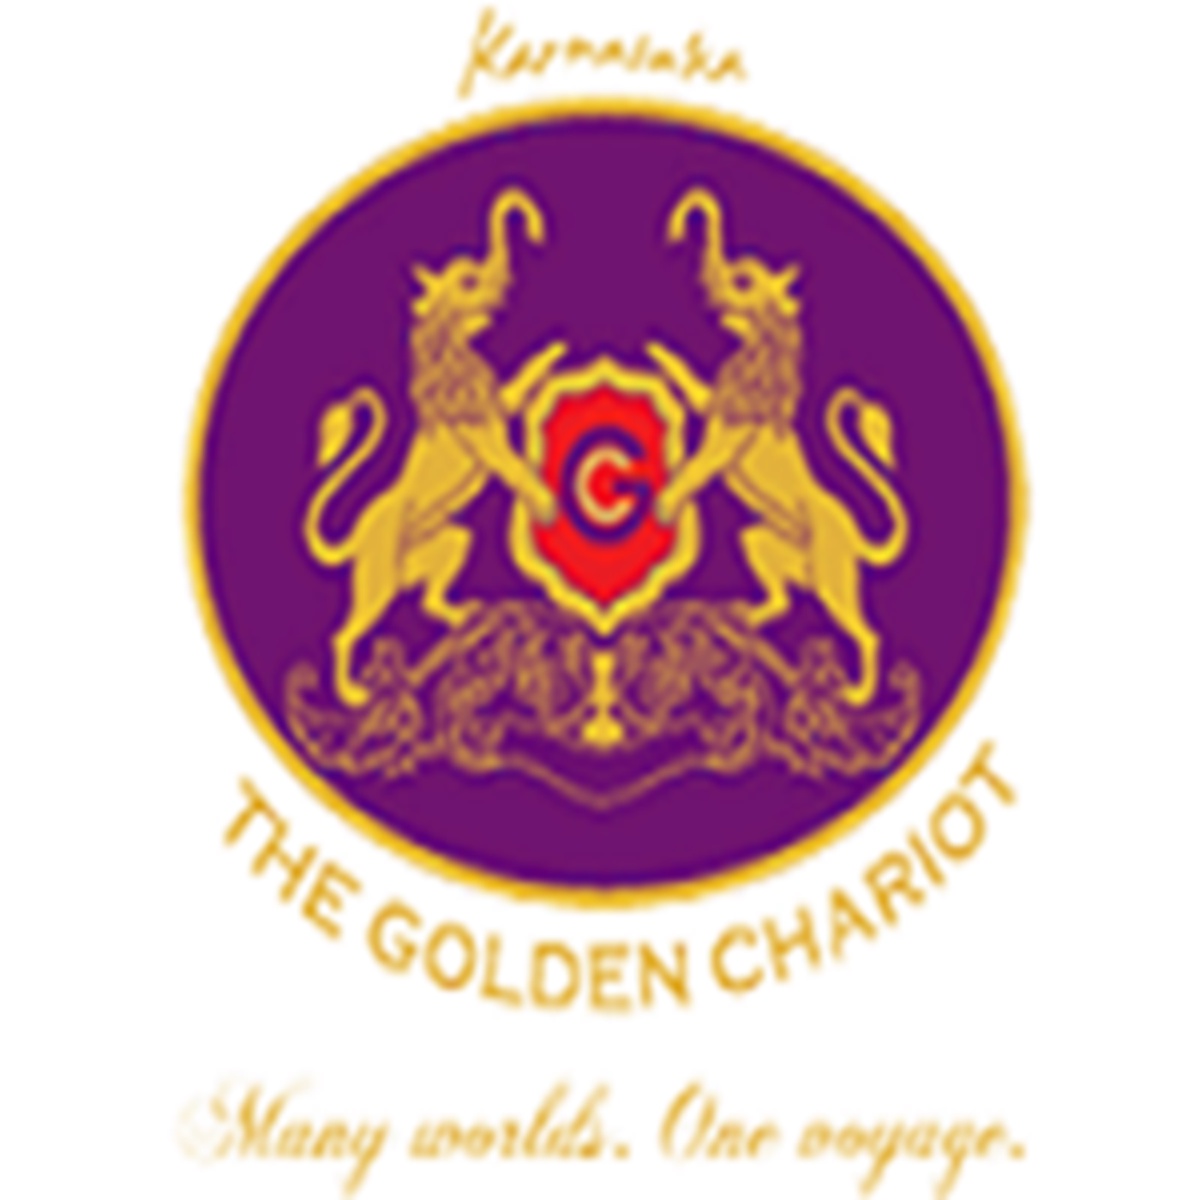 Indulge in a luxury train journey South India with IRCTC’s Golden Chariot